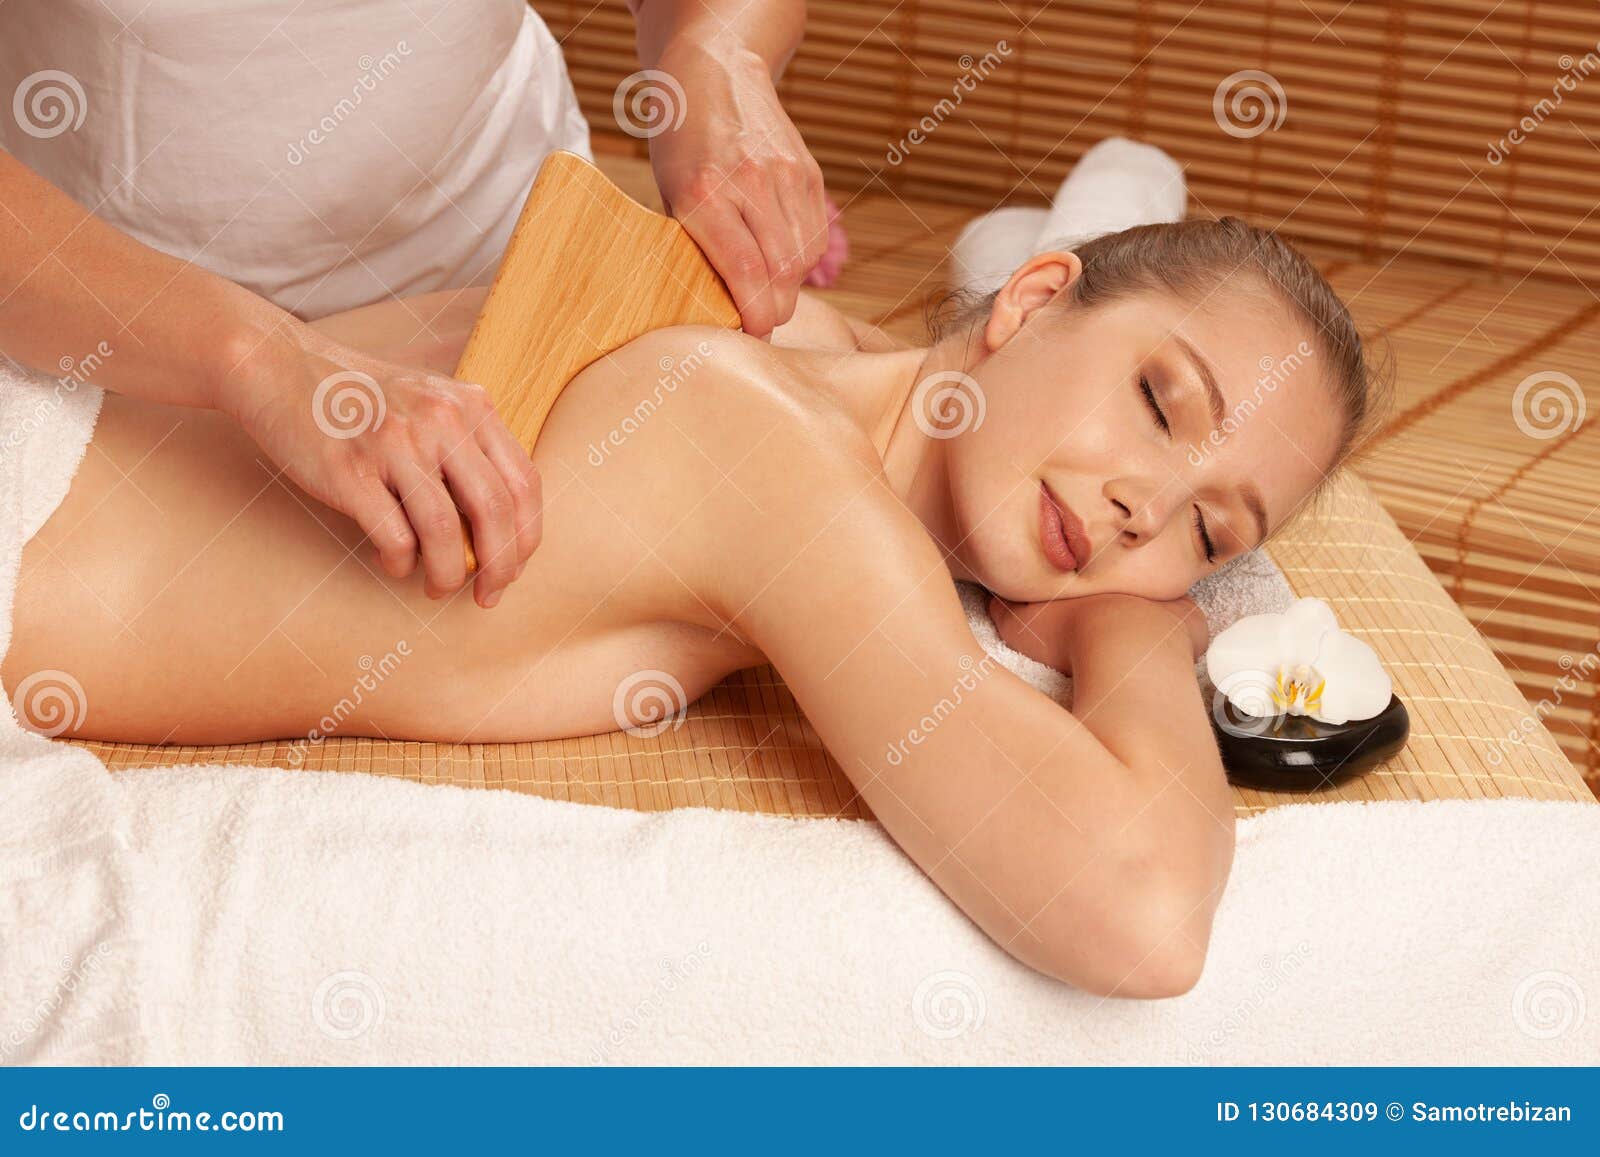 beautiful young woman having a maderotherapy massage treatment